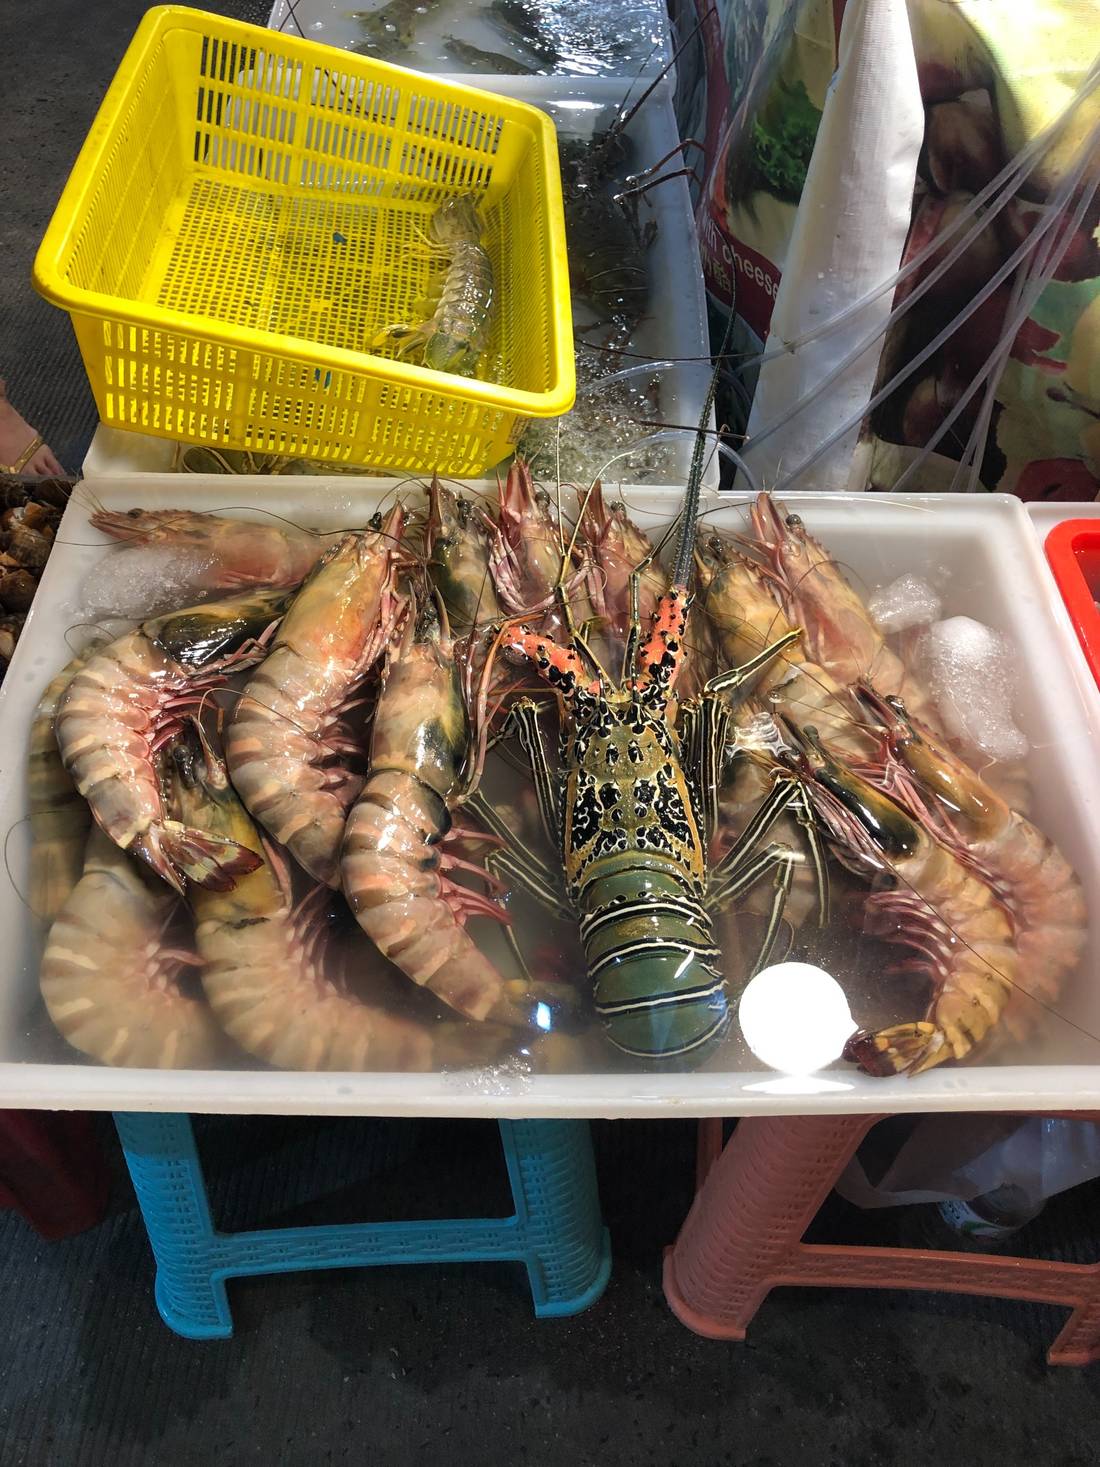 Don’t miss the chance to try a fresh lobster while in Patong